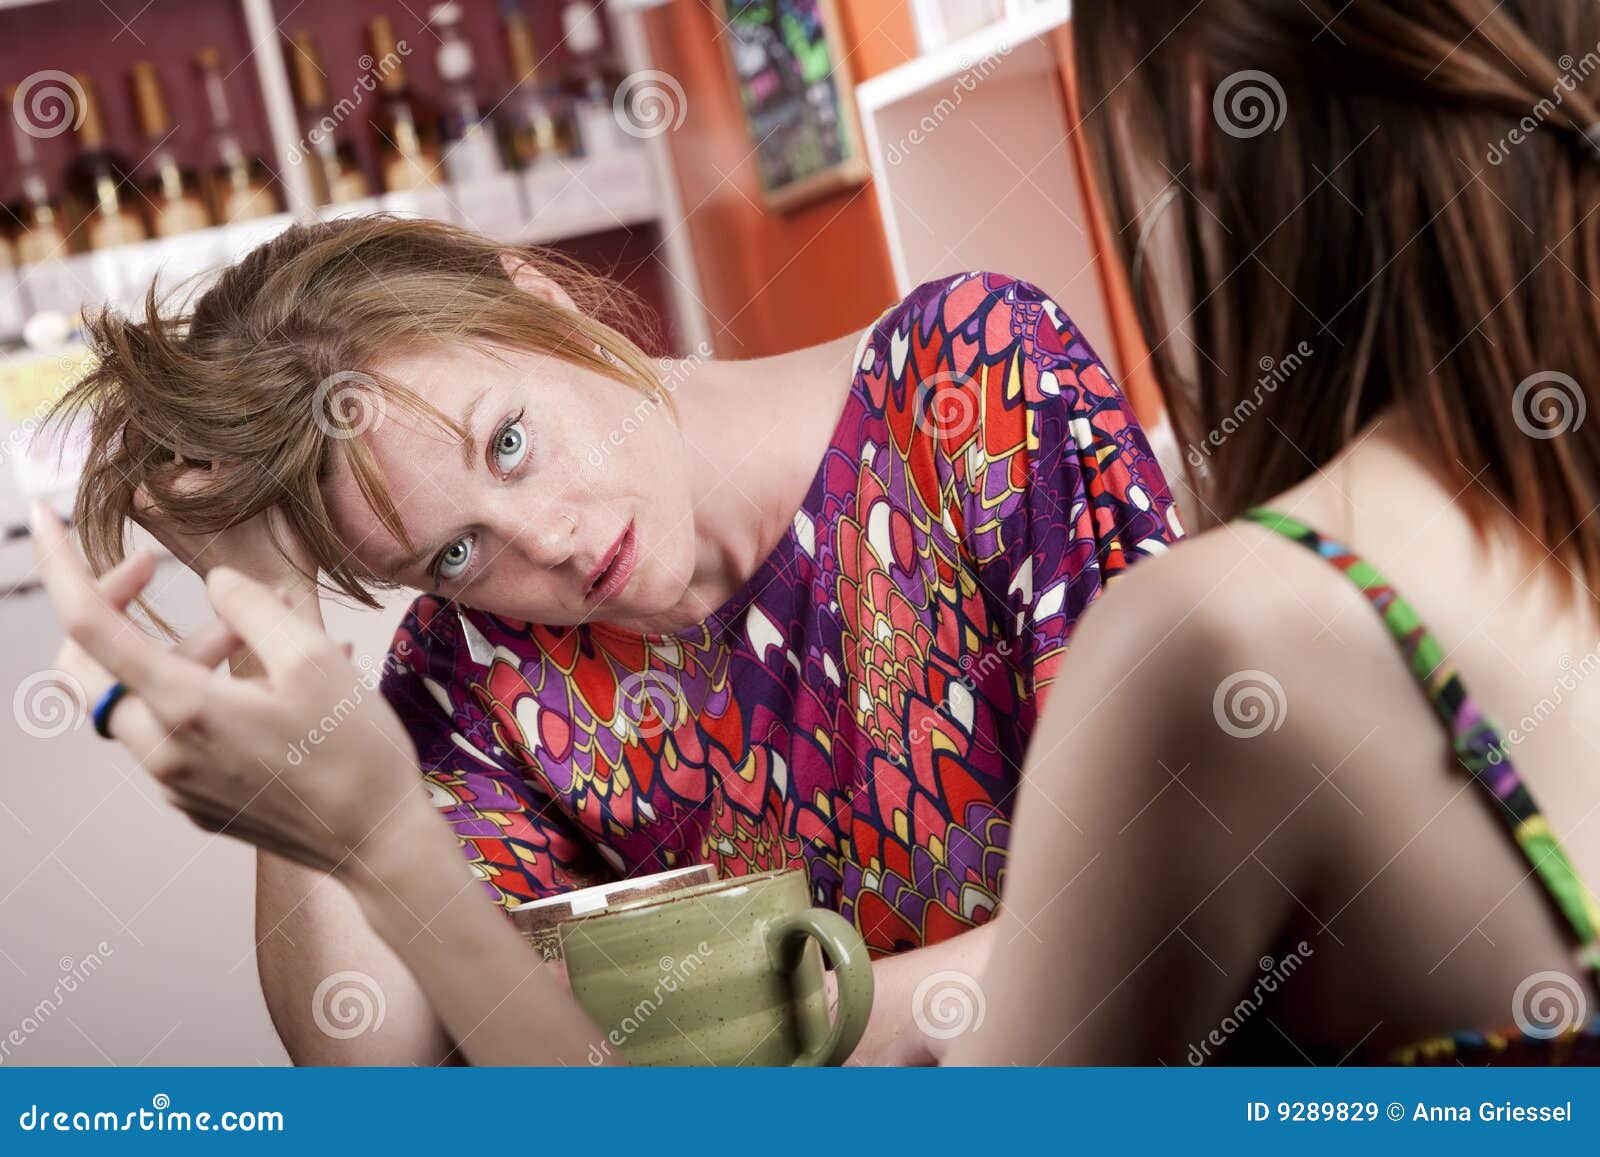 woman in coffee house bored by companion